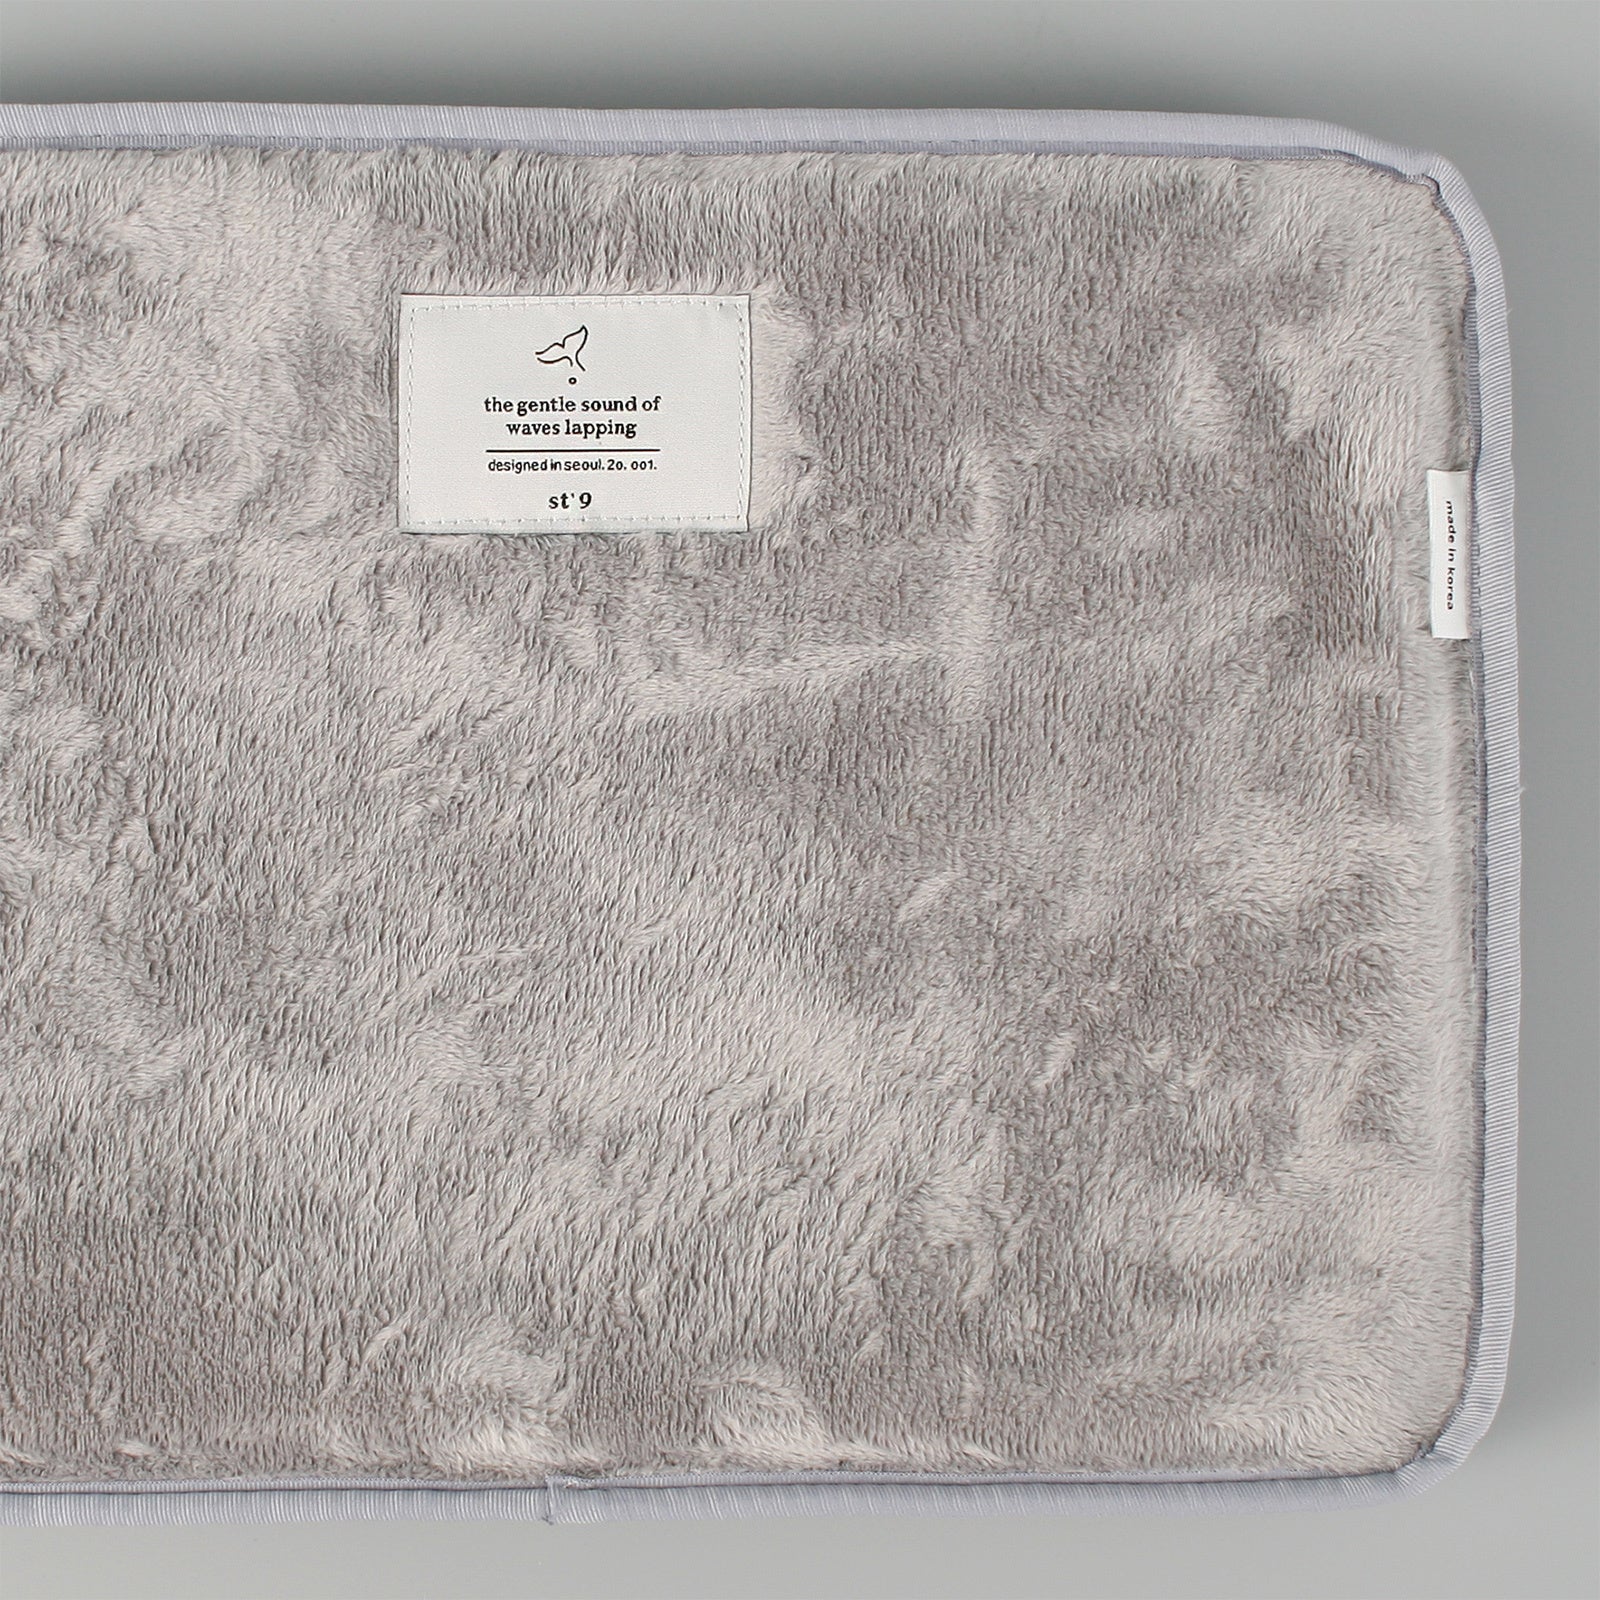 ST'9 XL size 15.6/16 inch Grey Laptop Sleeve Padded Travel Carry Case Bag ERATO